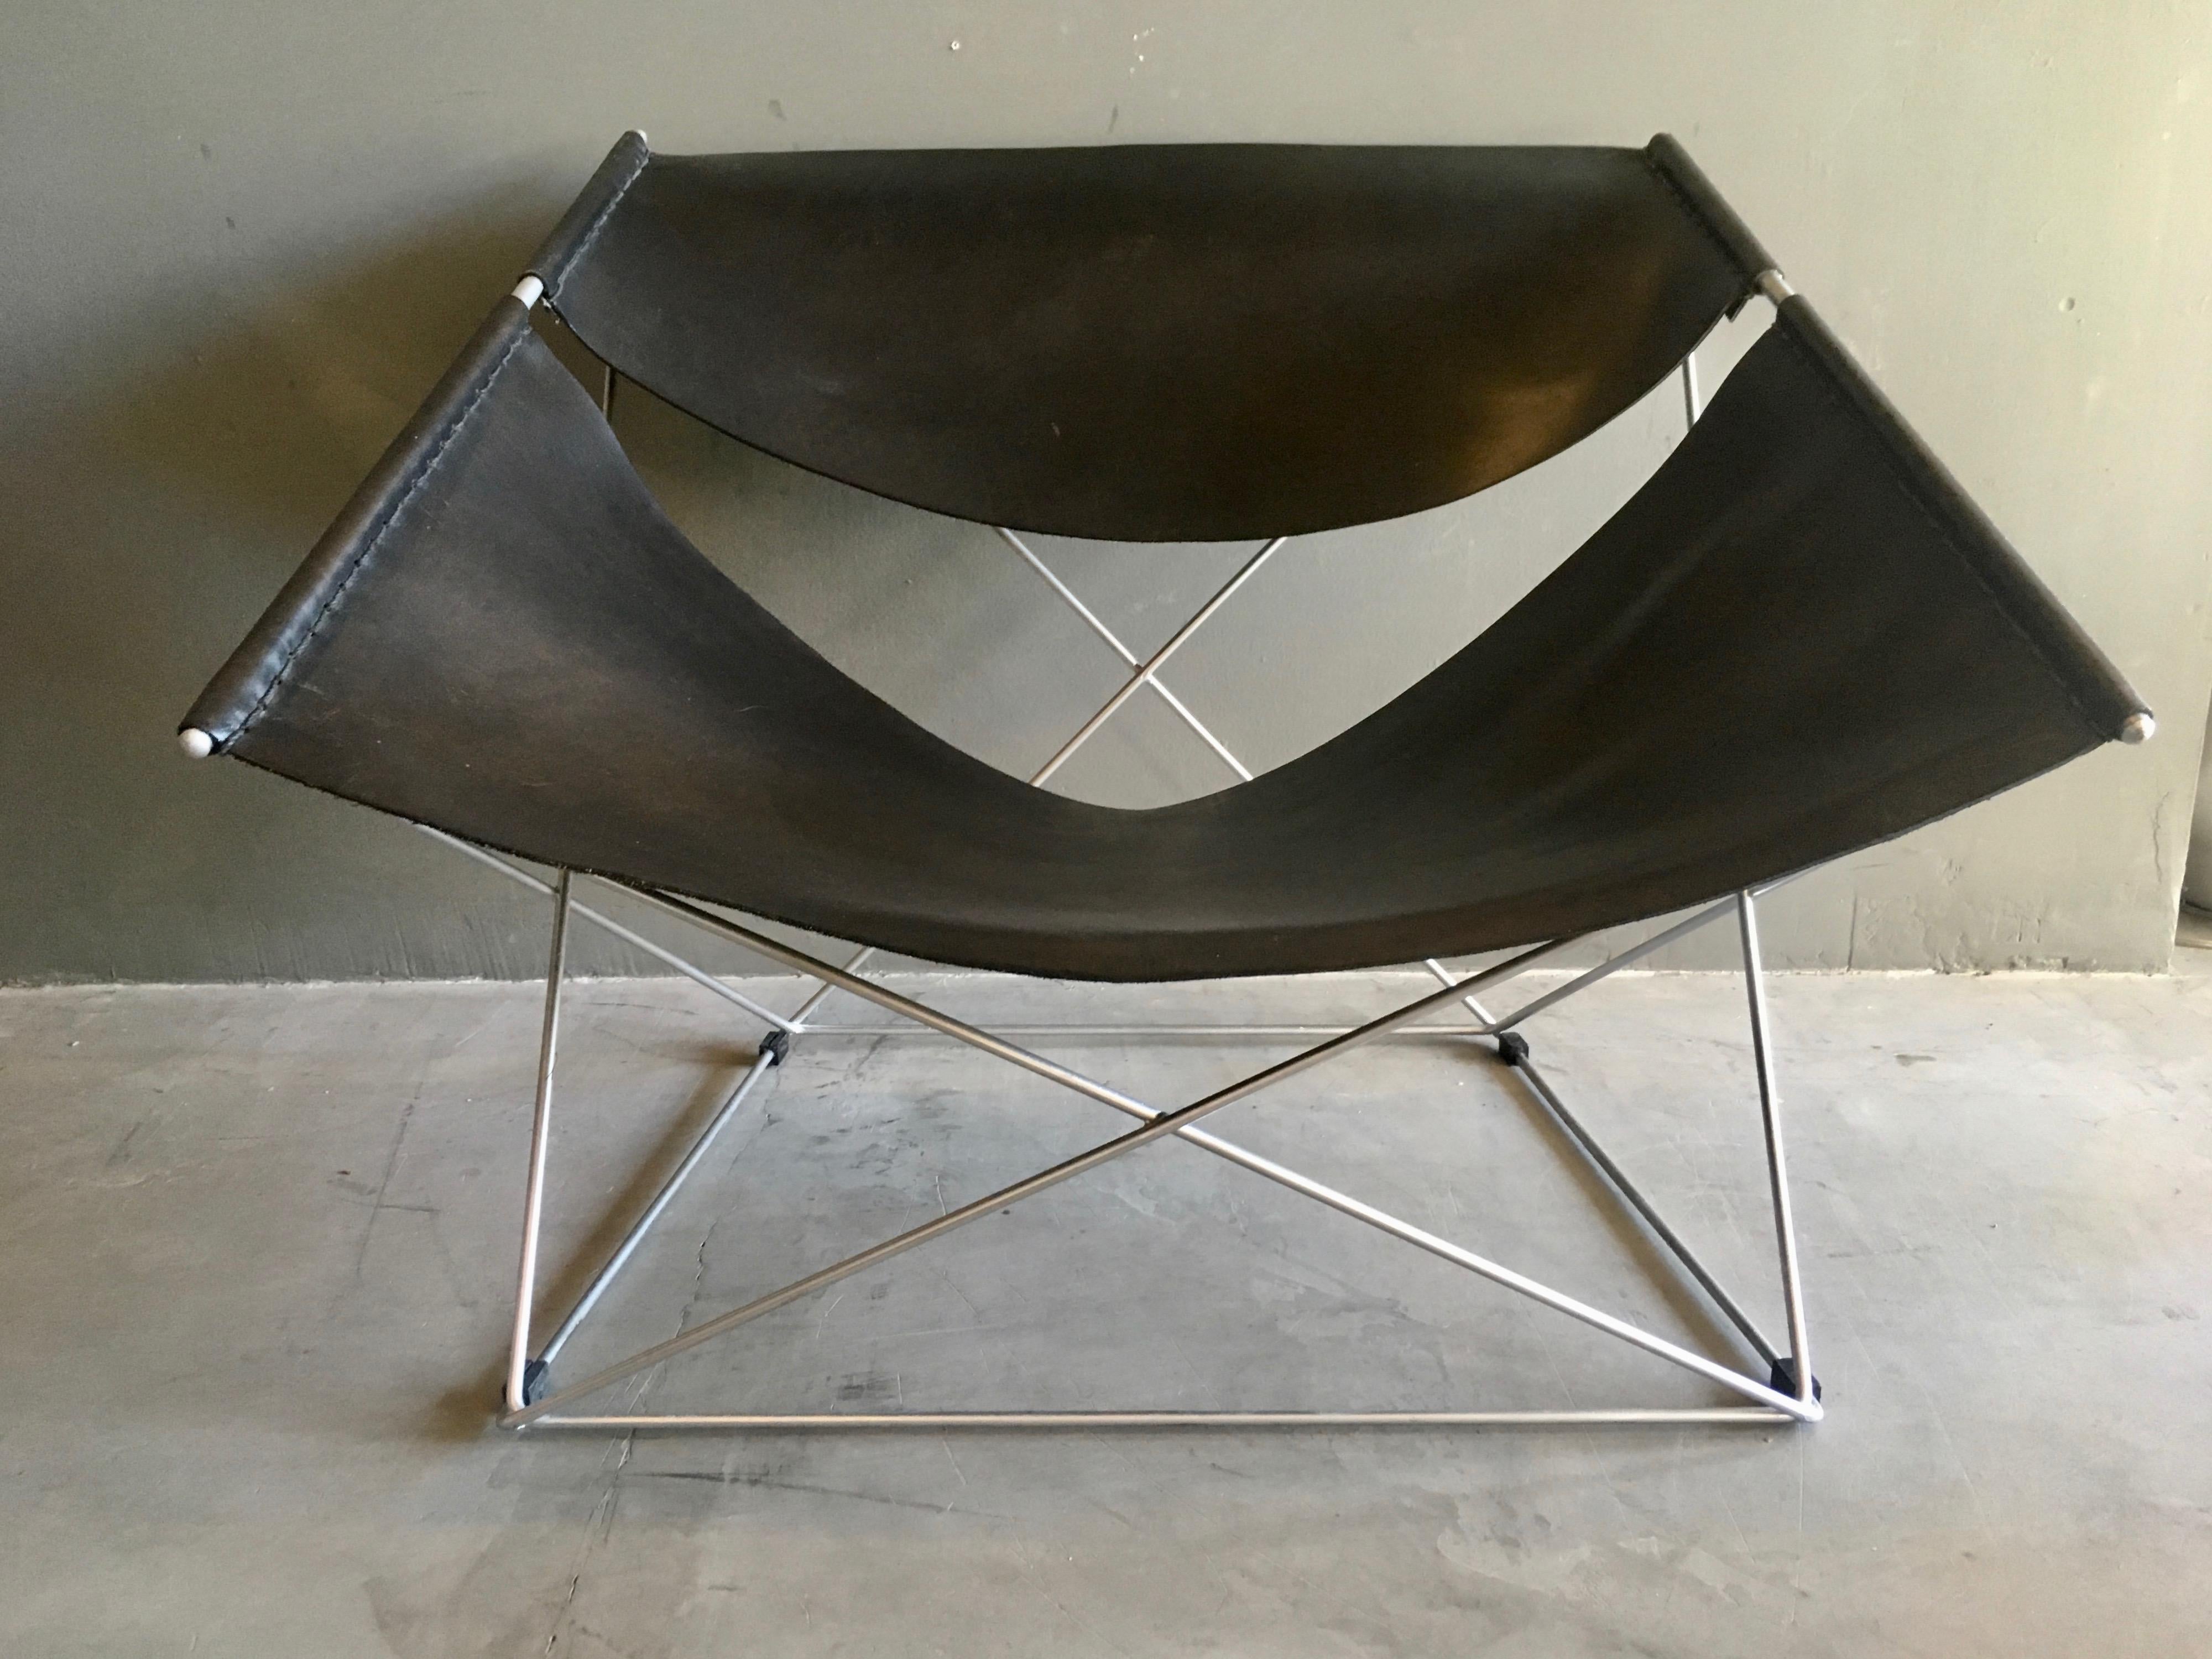 Sculptural leather and nickel chair by Pierre Paulin for Artifort. Type F675. Original leather and frame. Frame has been repainted silver. Very good condition. Excellent piece of design. Made in 1971.